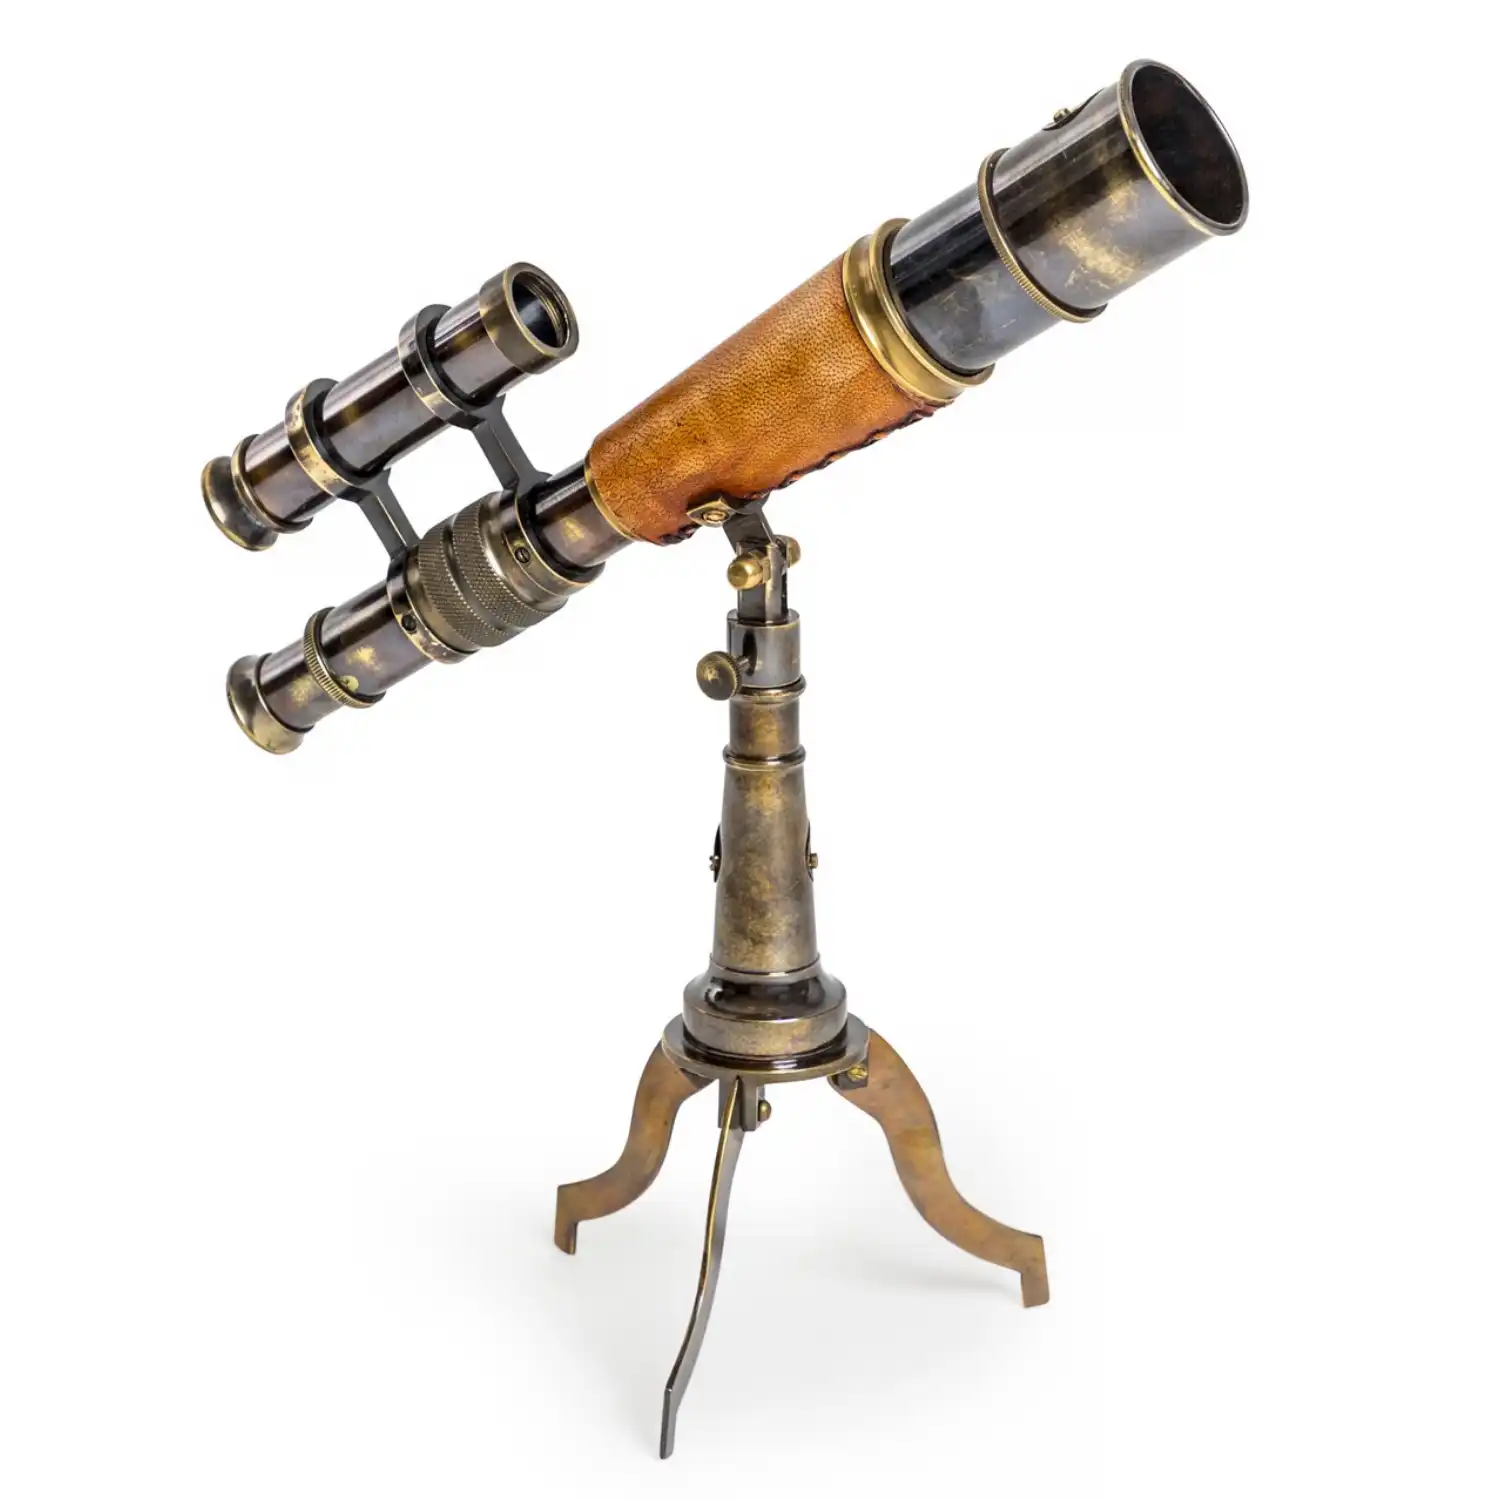 Antiqued Ornamental Telescope On Metal Stand